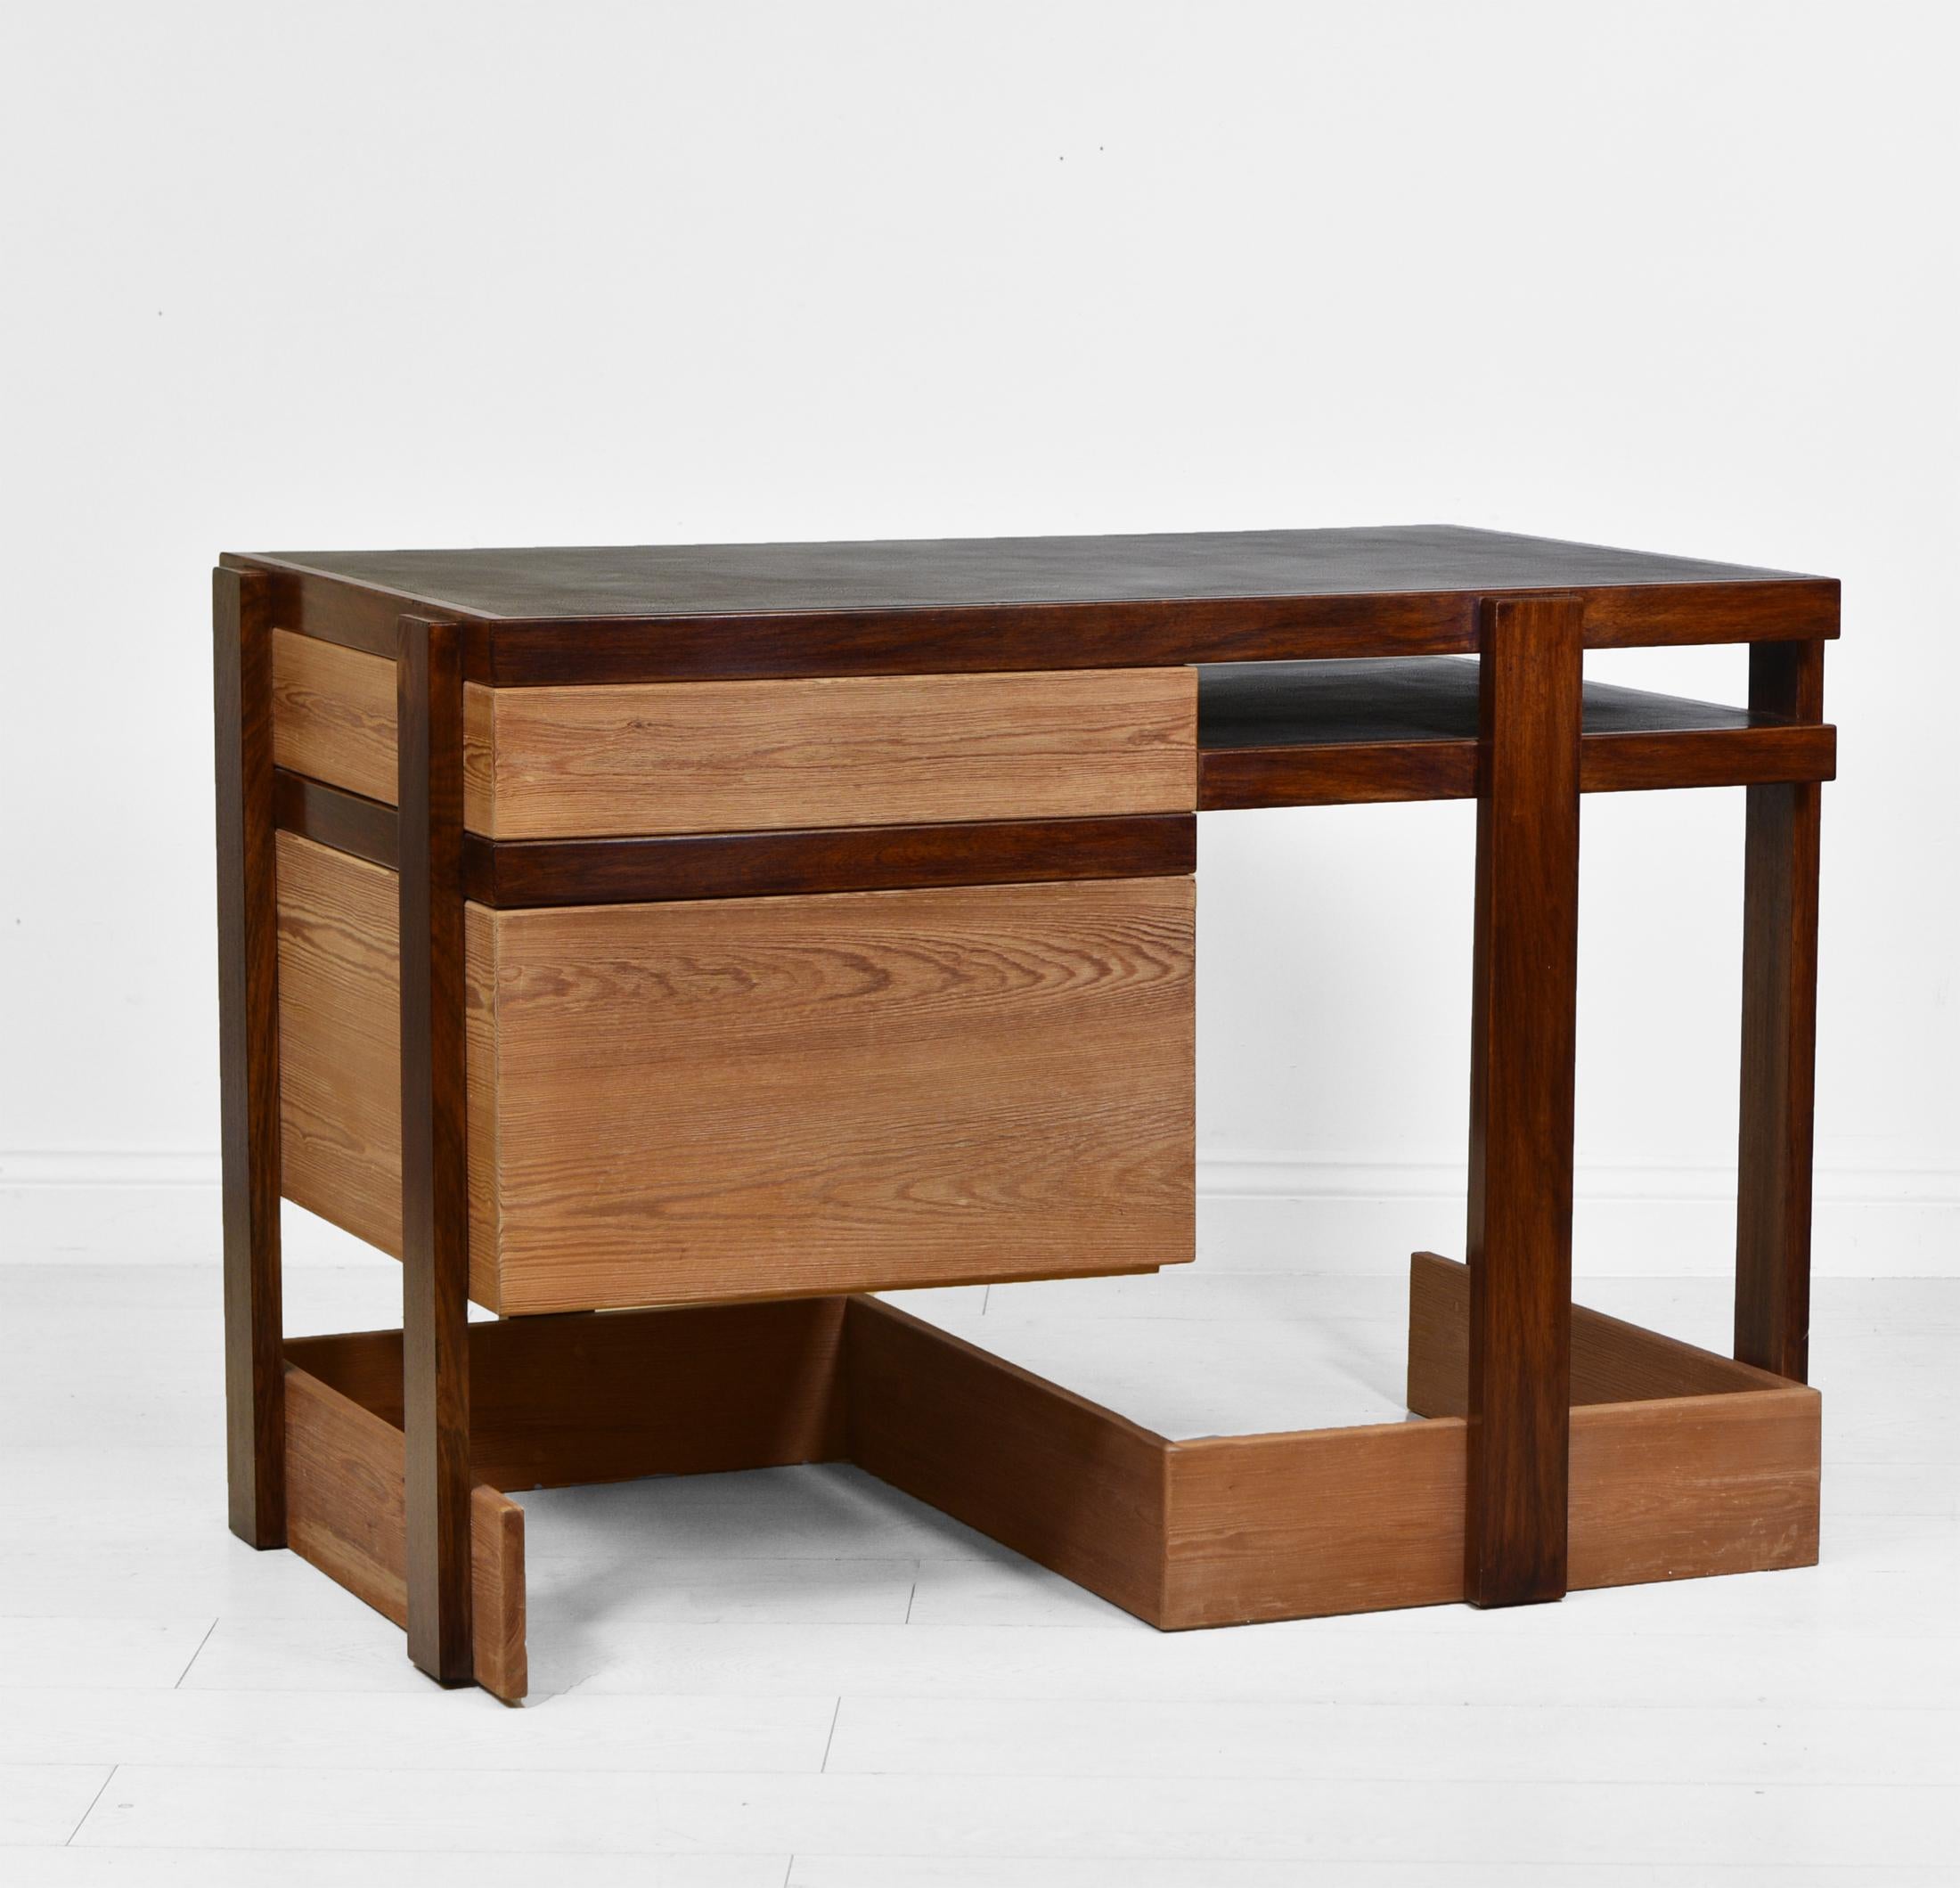 Late 20th Century Modernist Bombay Rosewood & Scrub Pine Desk + Chair by George Sneed Circa 1970s For Sale